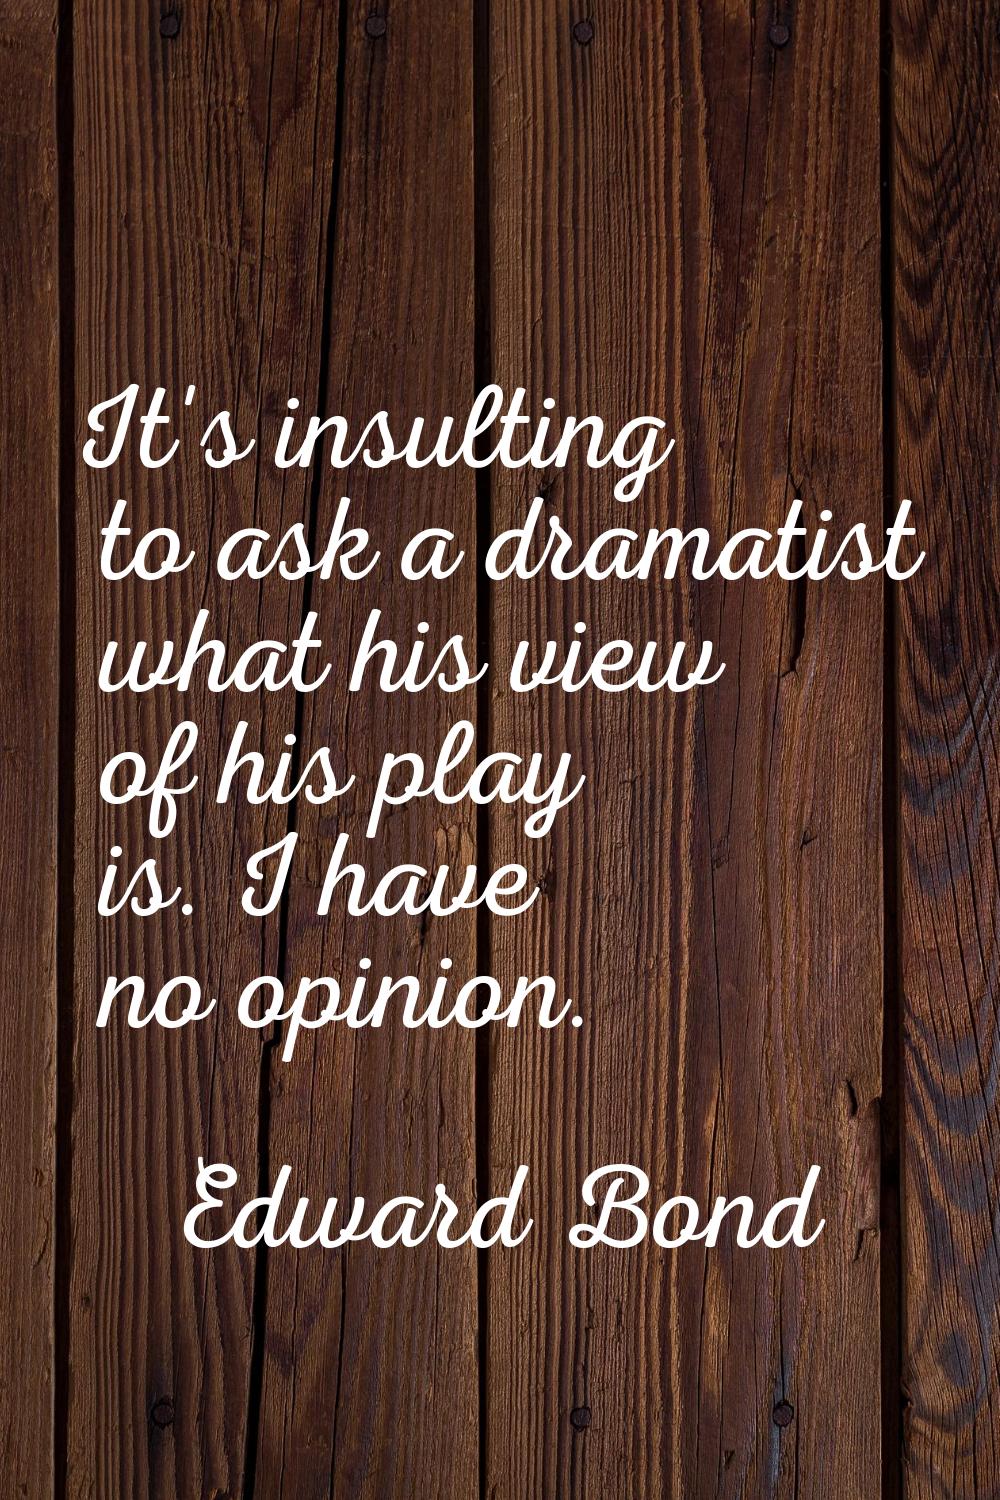 It's insulting to ask a dramatist what his view of his play is. I have no opinion.